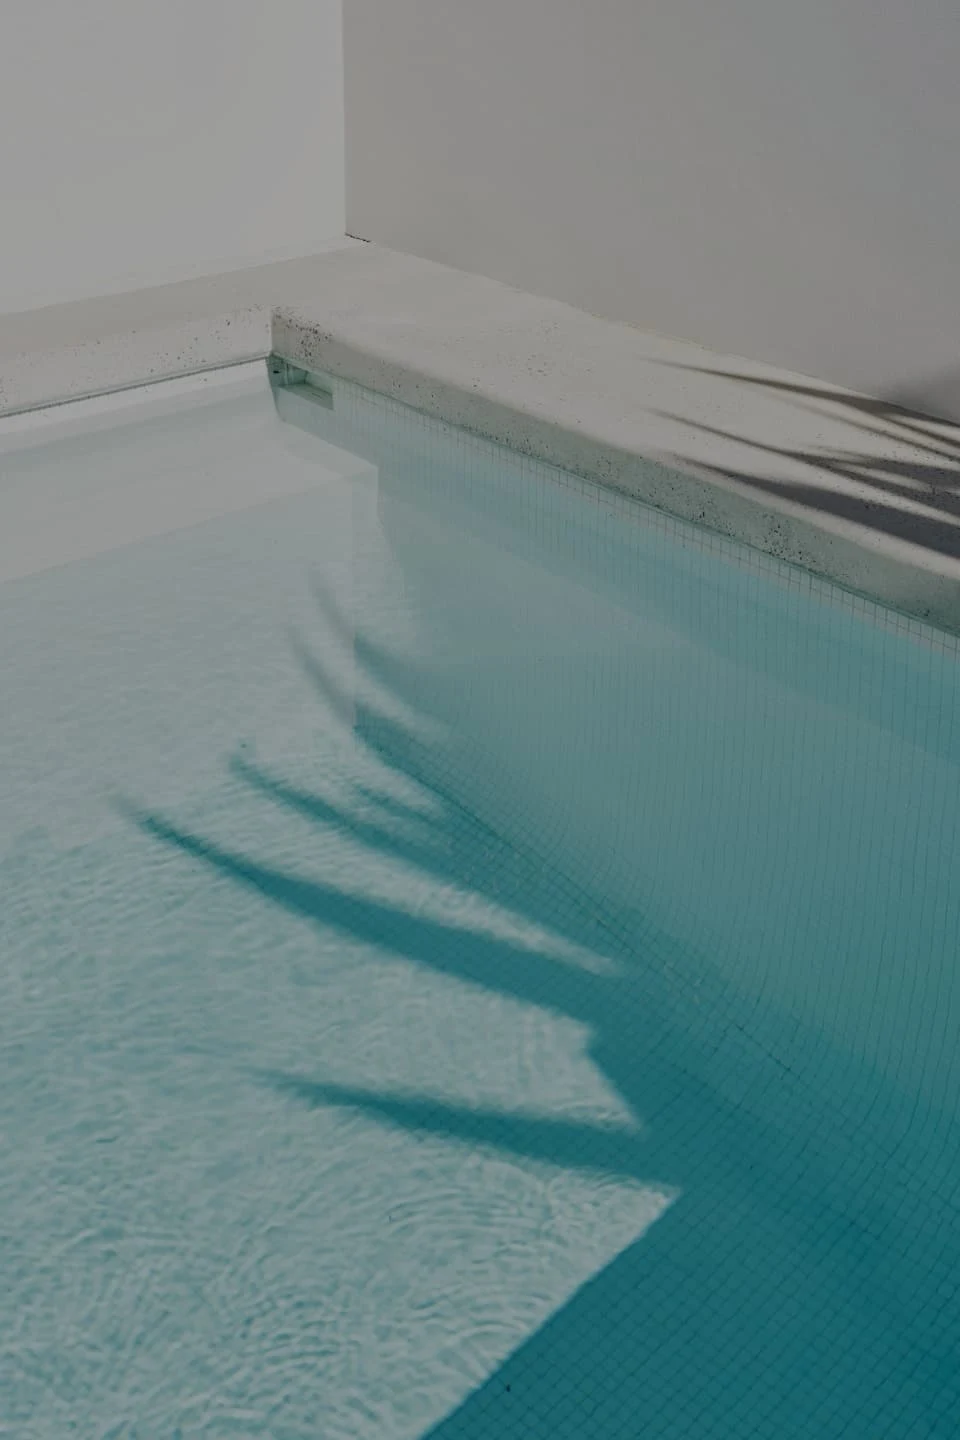 A still blue swimming pool with abstract shadow patterns